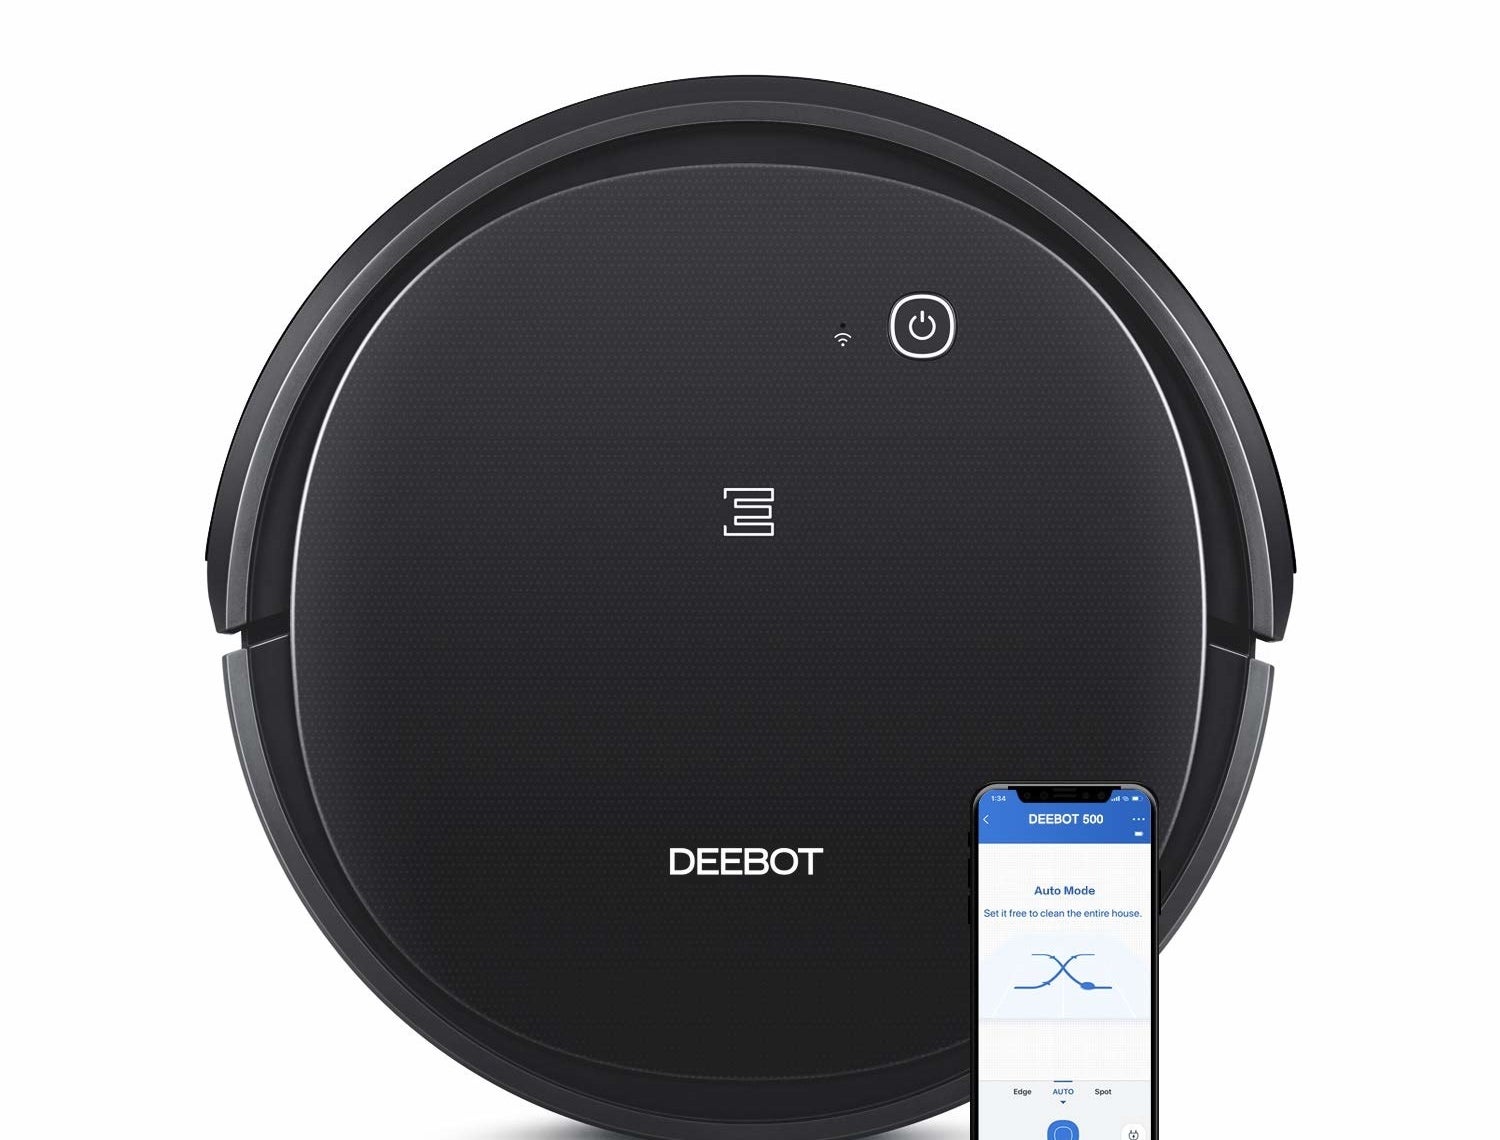 A black Deebot 500 Robotic Vacuum Cleaner with a smartphone leaning on it.